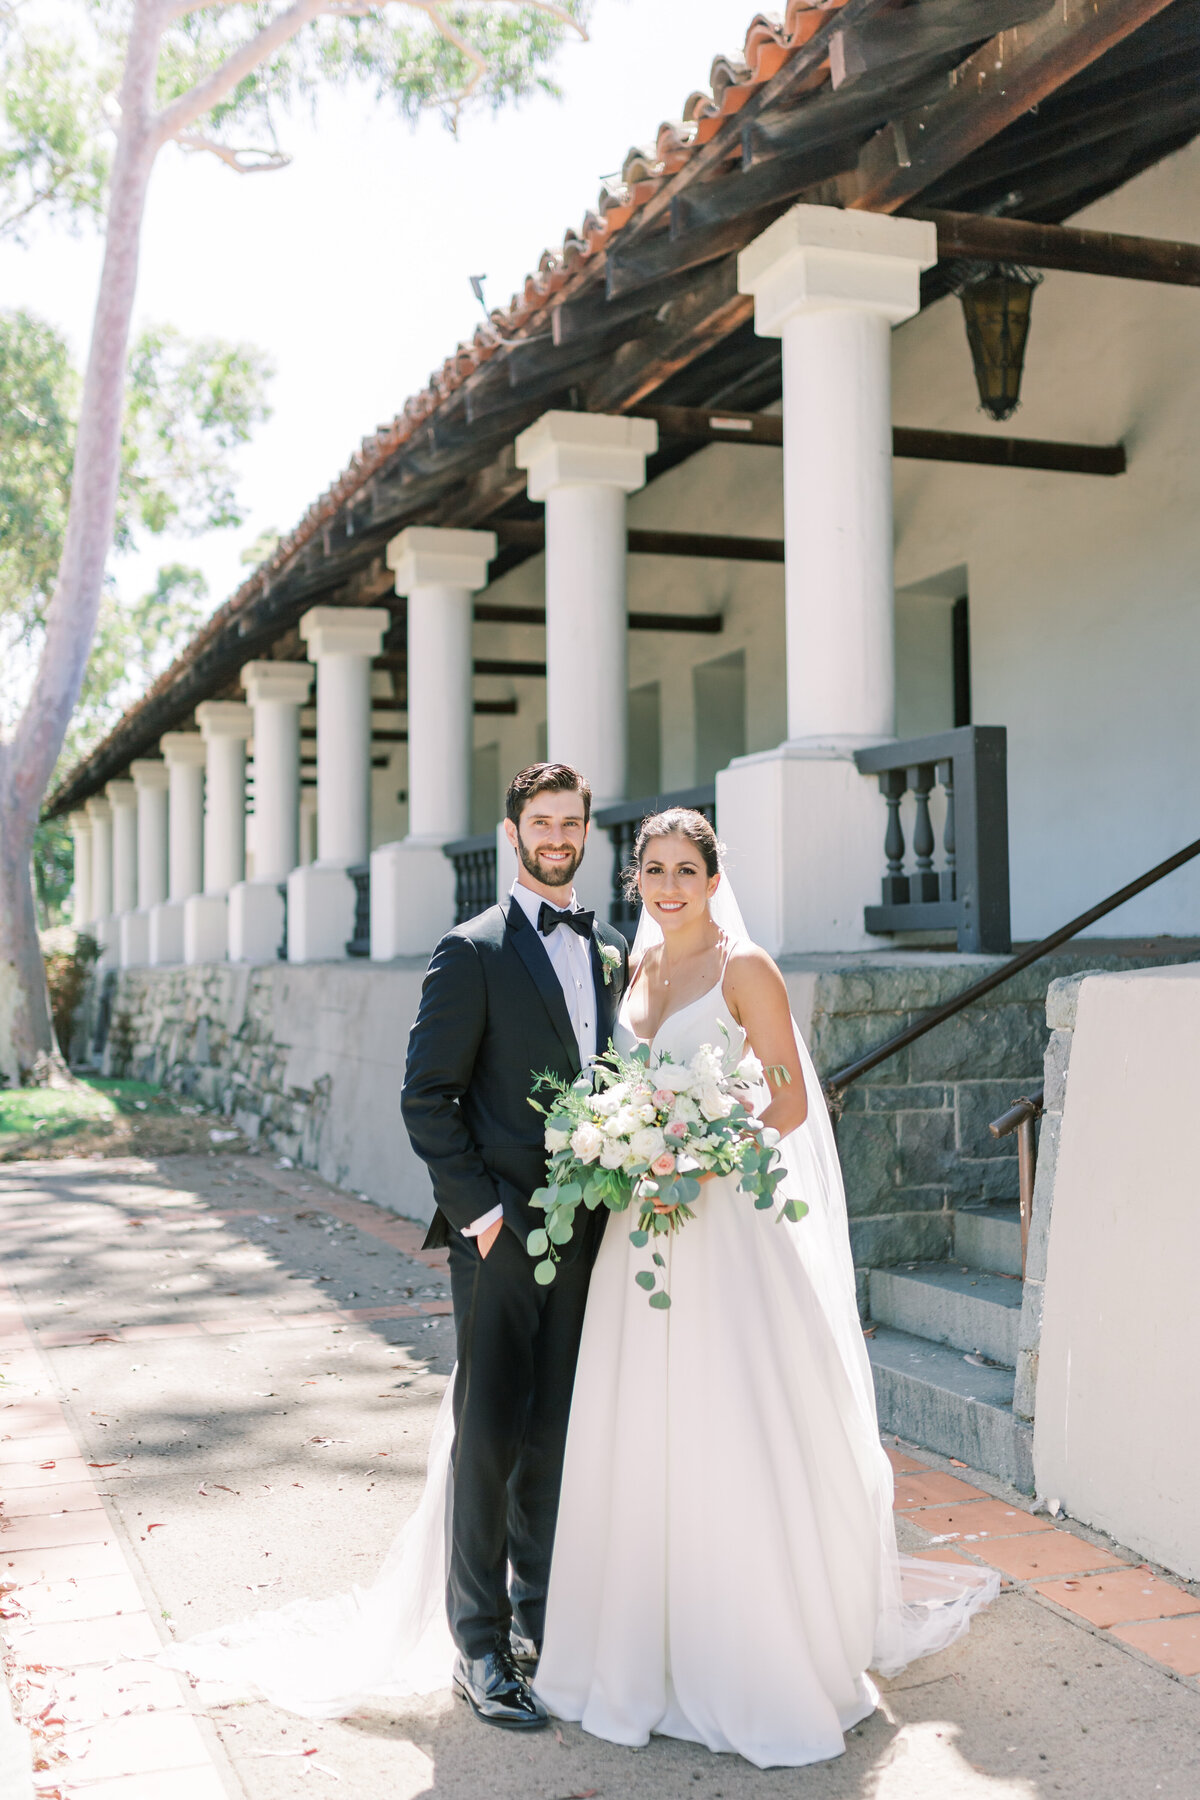 Jocelyn and Spencer Photography California Santa Barbara Wedding Engagement Luxury High End Romantic Imagery Light Airy Fineart Film Style9